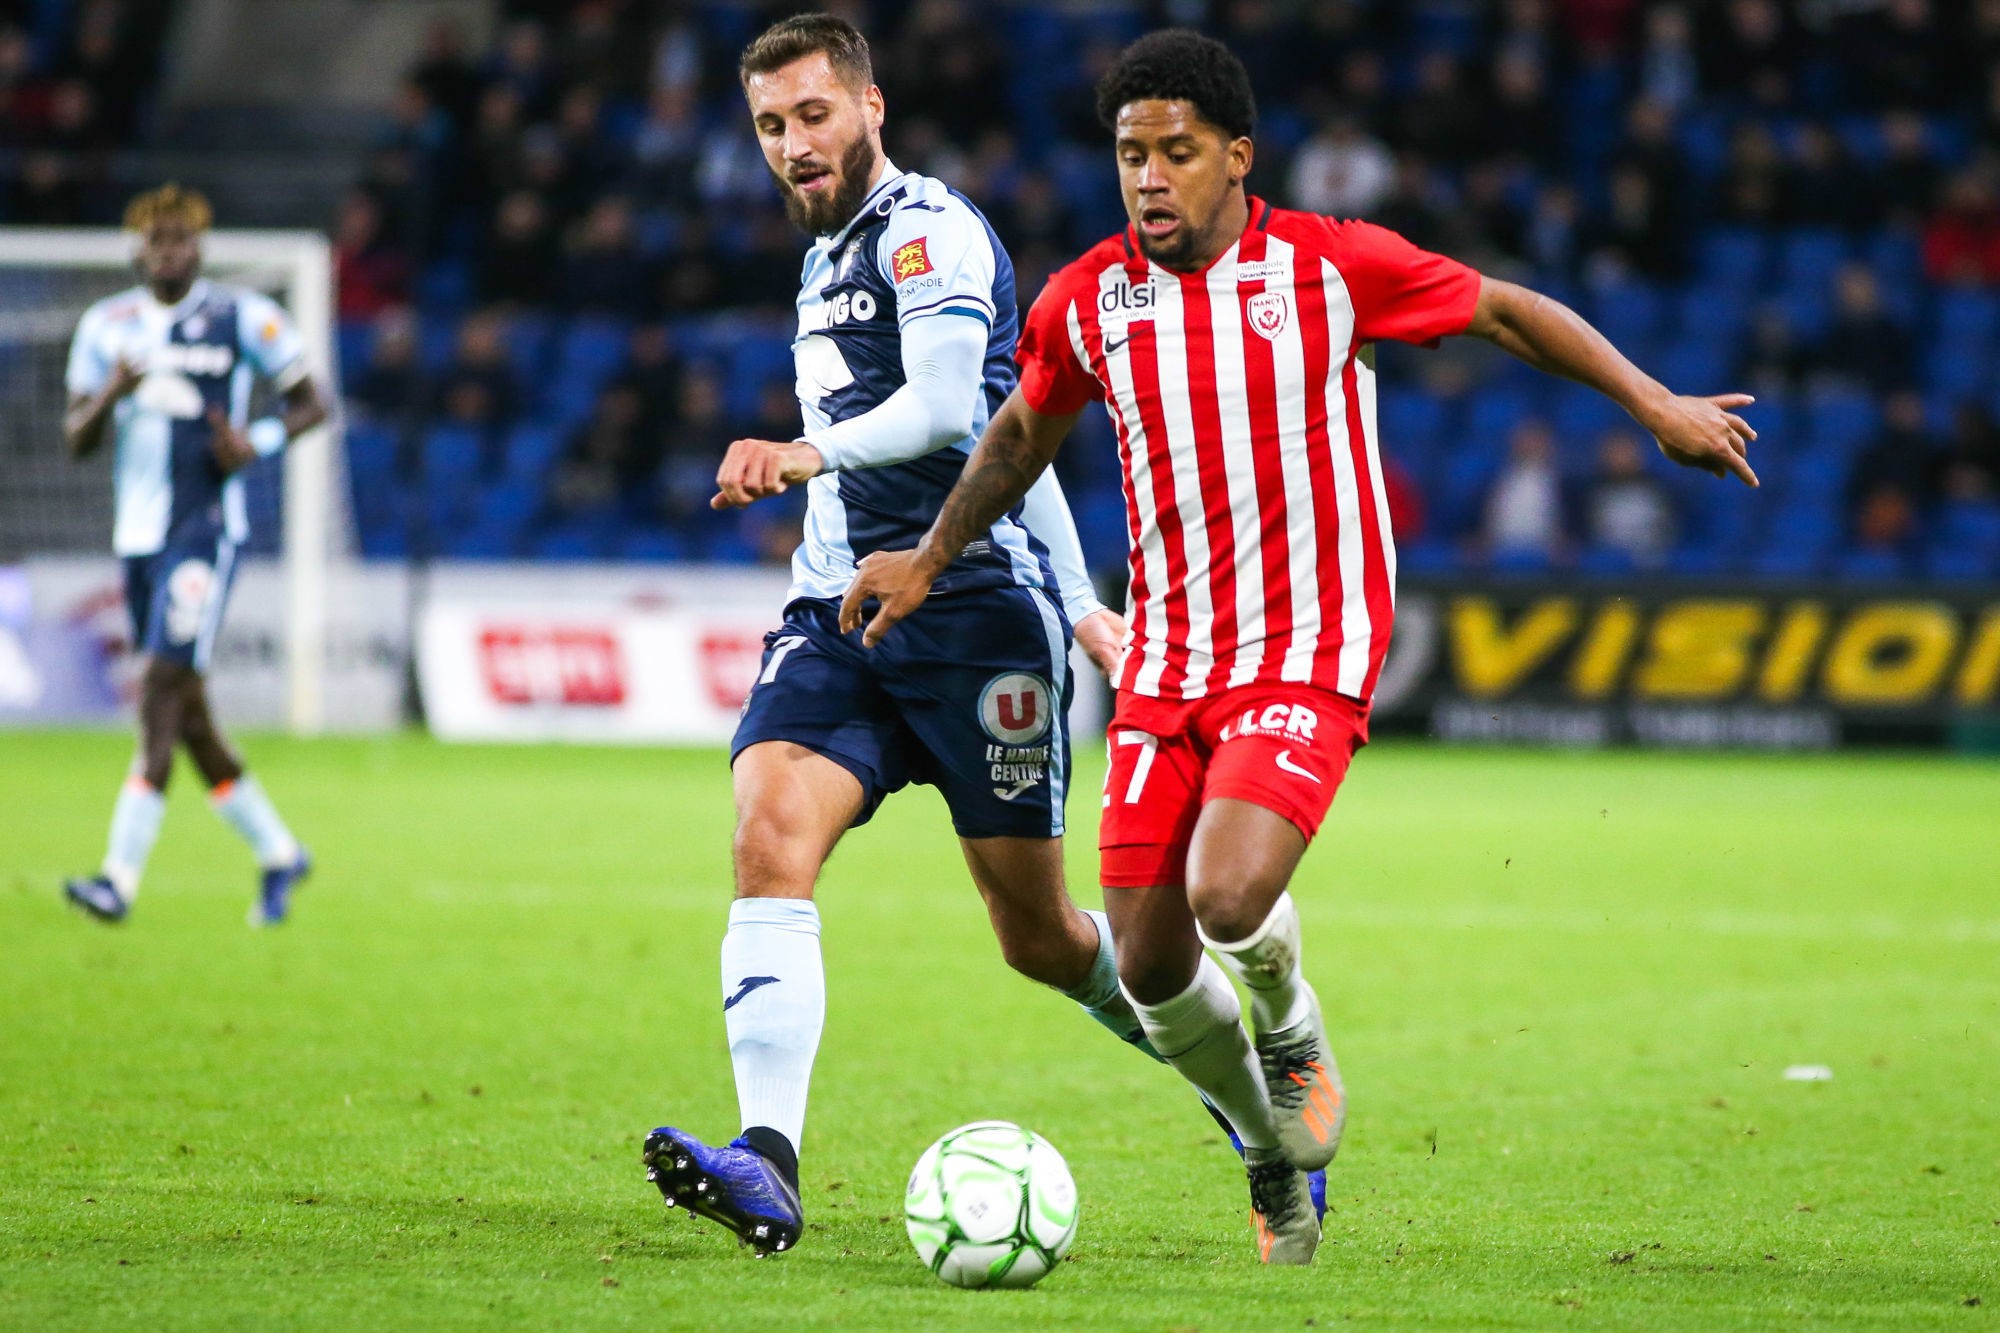 Romain BASQUE of Le Havre and Vagner DIAS GONCALVES of Nancy during the Ligue 2 match between Le Havre and Nancy at Stade Oceane on November 4, 2019 in Le Havre, France. (Photo by Maxime Le Pihif/Icon Sport) - Vagner DIAS GONCALVES - Romain BASQUE - Stade Oceane - Le Havre (France)